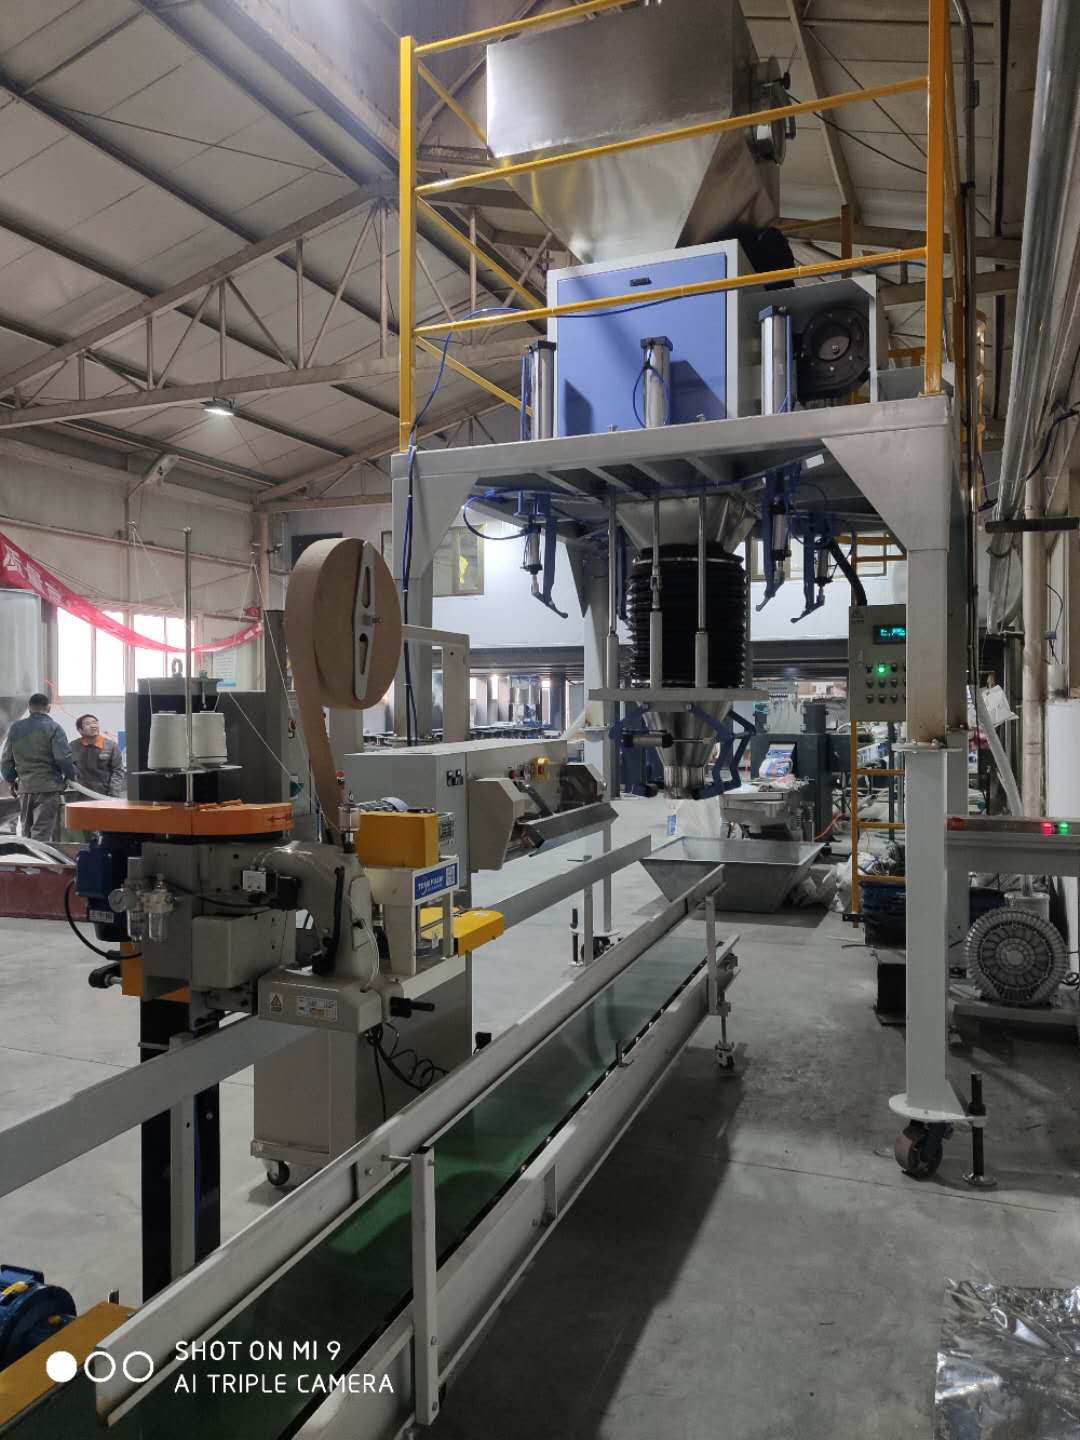 Tobacco Fertilizer bagging machine Automated Bagging Line Fully Automatic Packing Palletizing Line, Fully Automatic Packing Line, Fully Automatic Bagging Line, Fully Automatic filling and packaging li